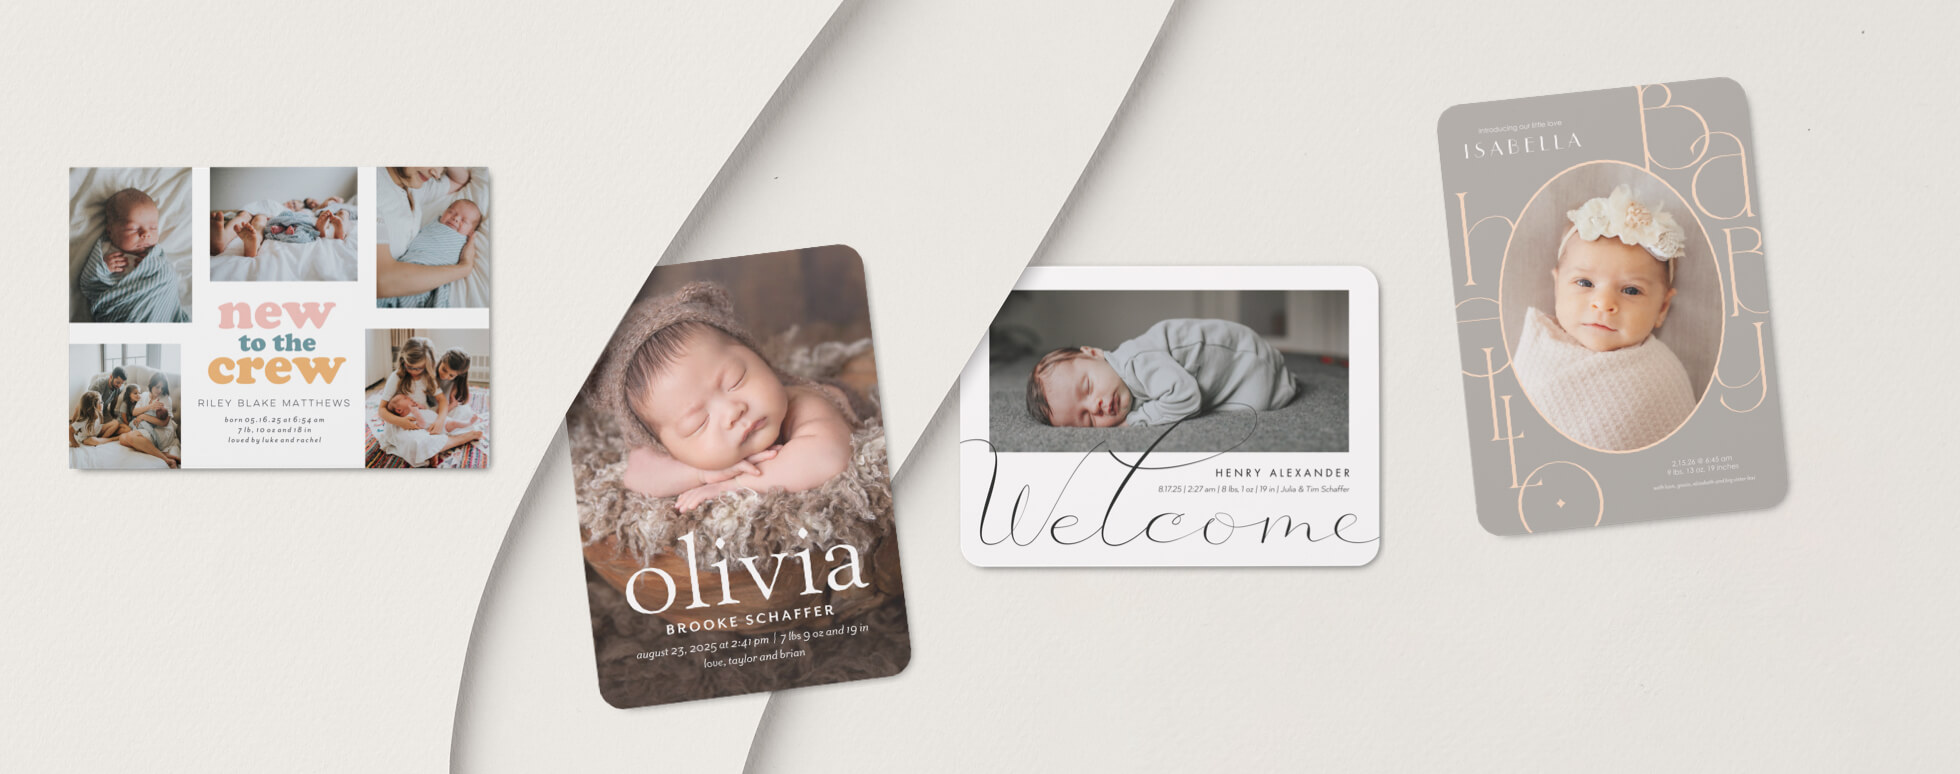 Invitations, Announcements, Personalized Cards & Stationery